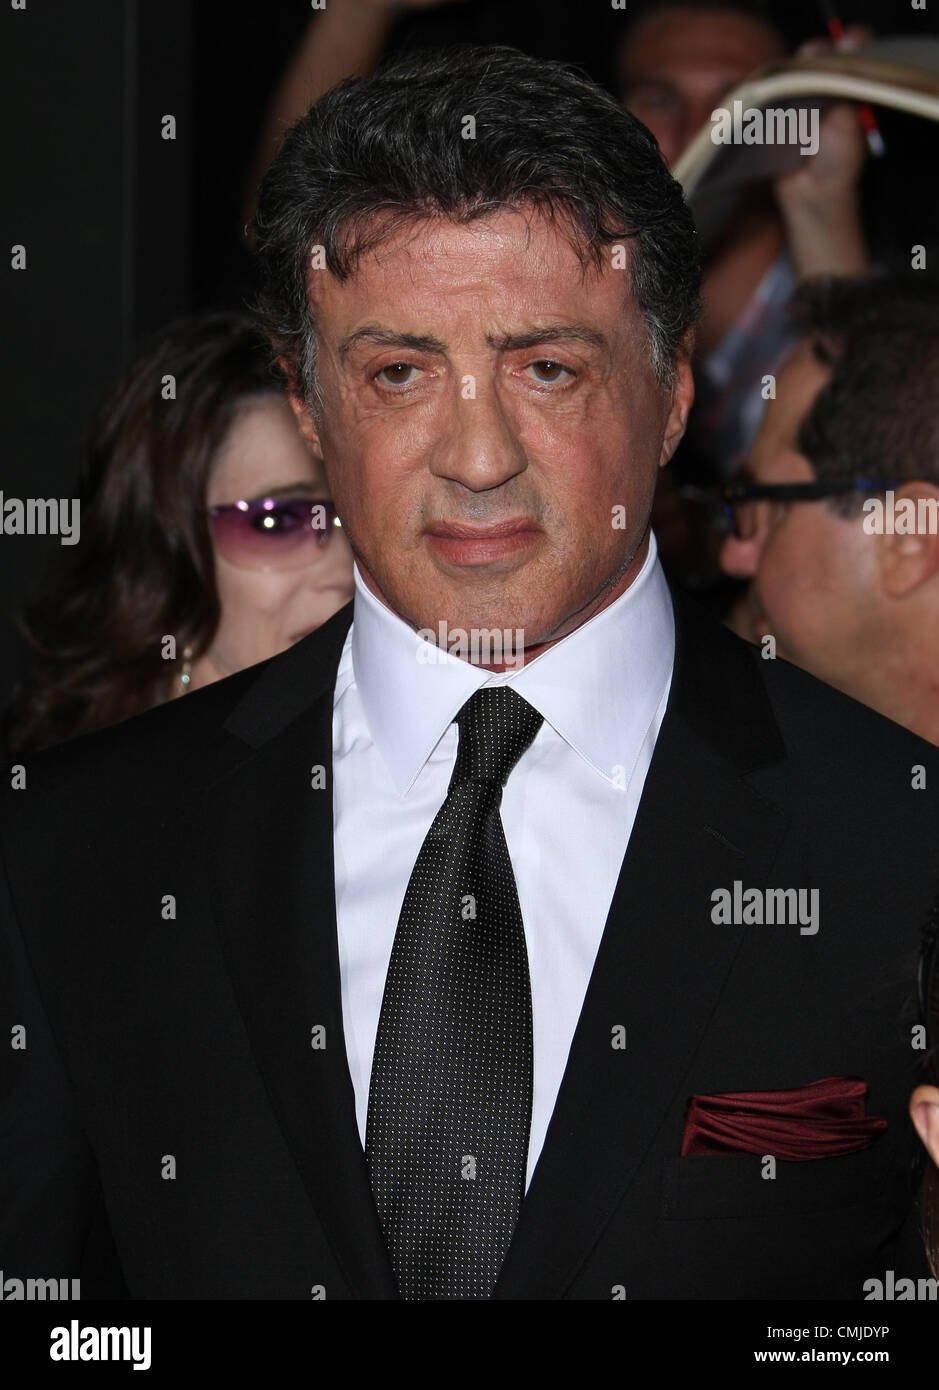 SYLVESTER STALLONE EXPENDABLES 2. Welt PREMIERE HOLLYWOOD LOS ANGELES Kalifornien USA 15. August 2012 Stockfoto